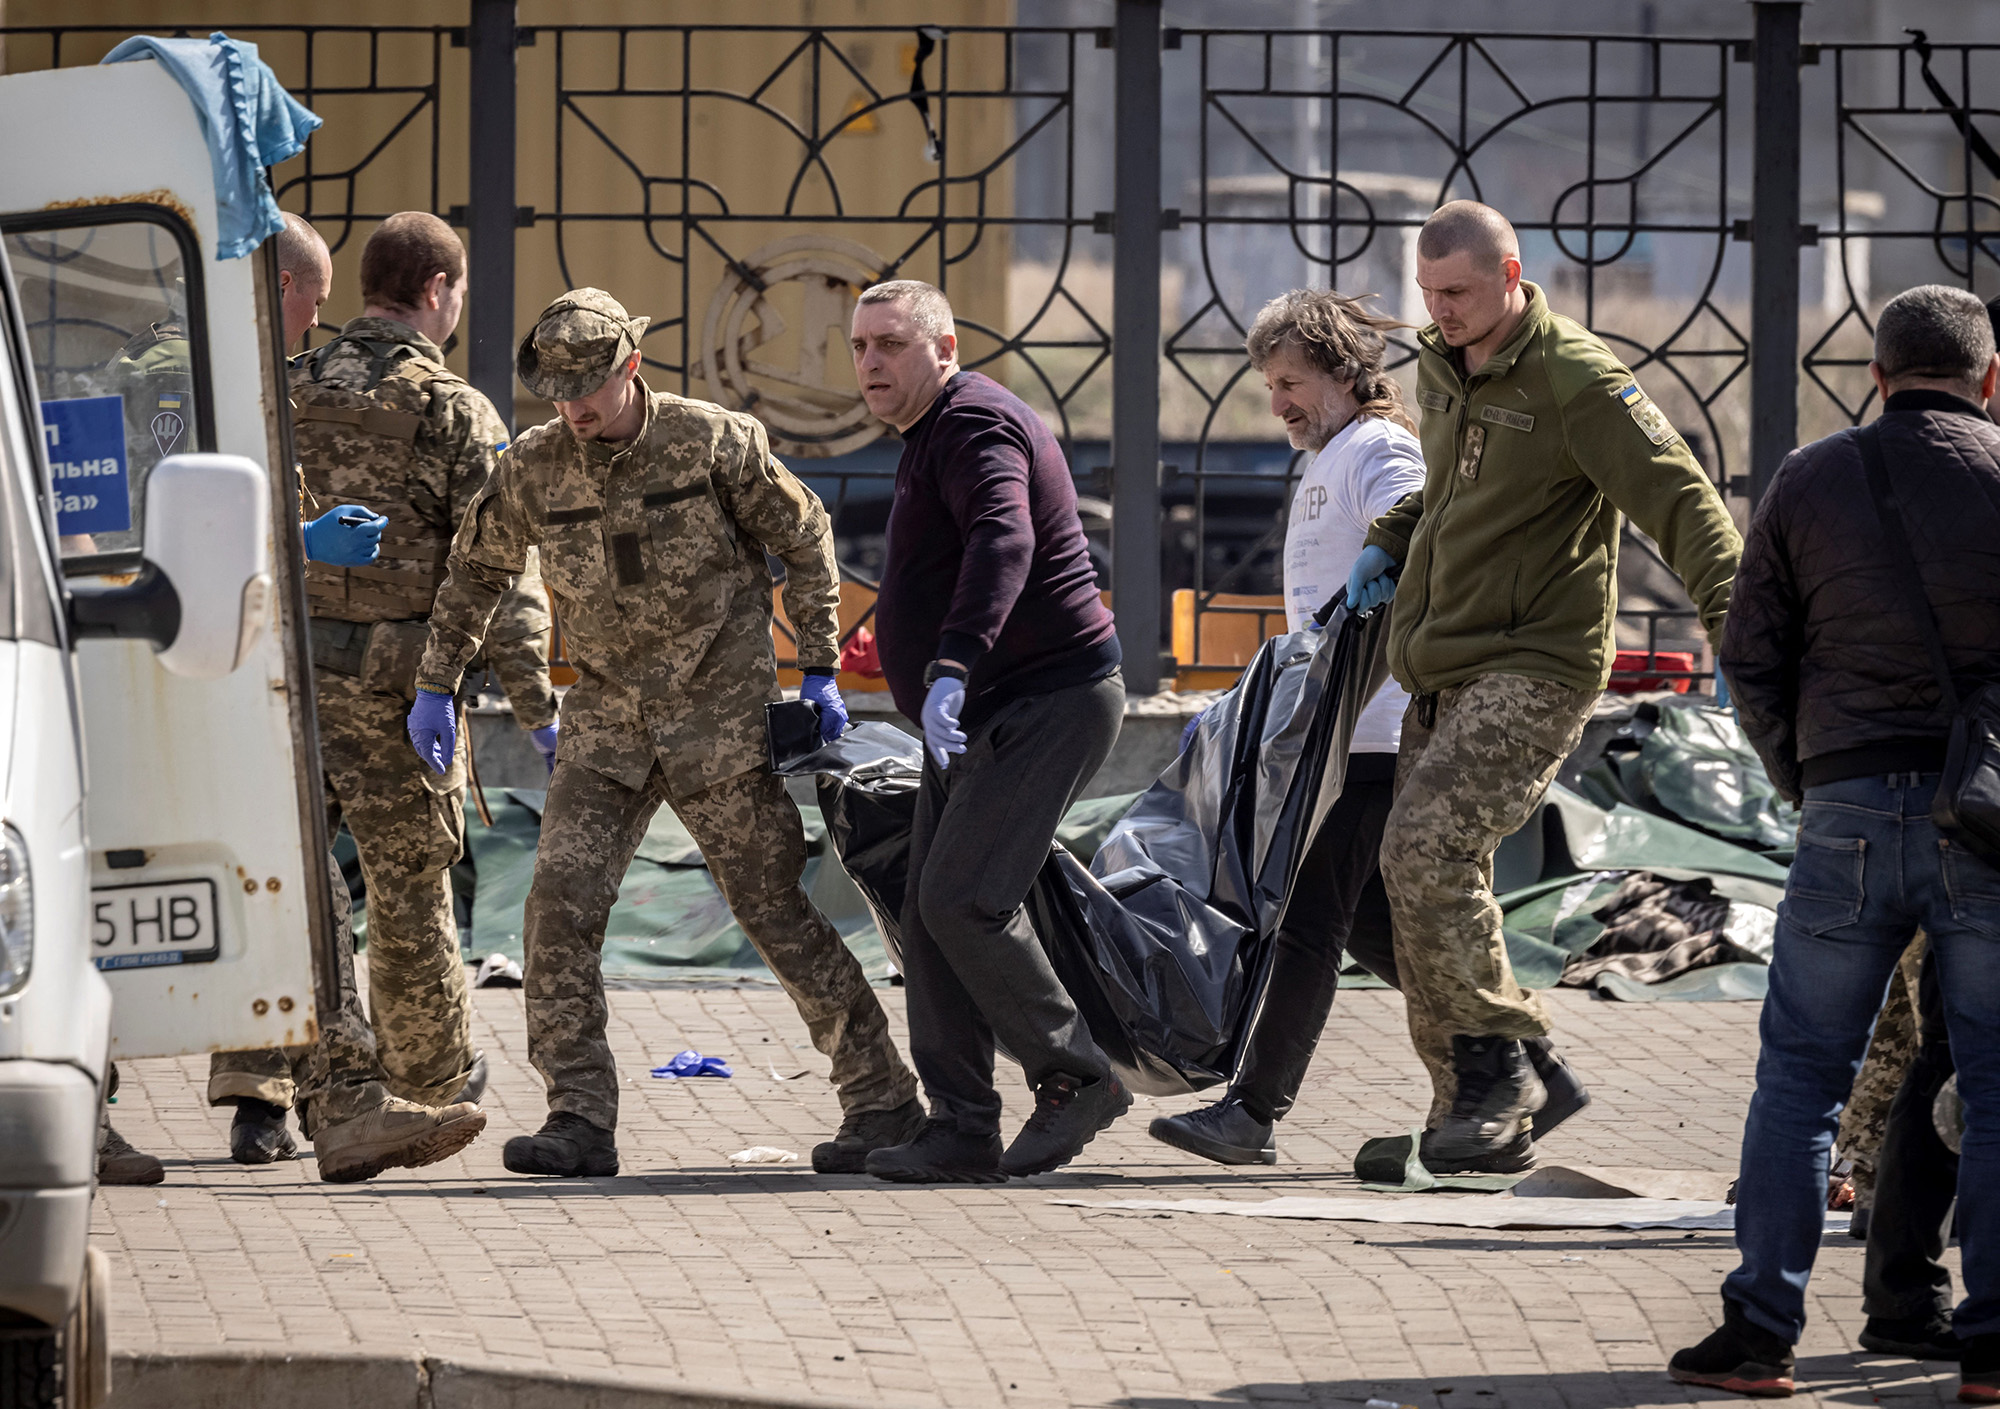 Ukrainian soldiers remove bodies after a rocket attack killed at a train station in Kramatorsk, Ukraine, on April 8, 2022.